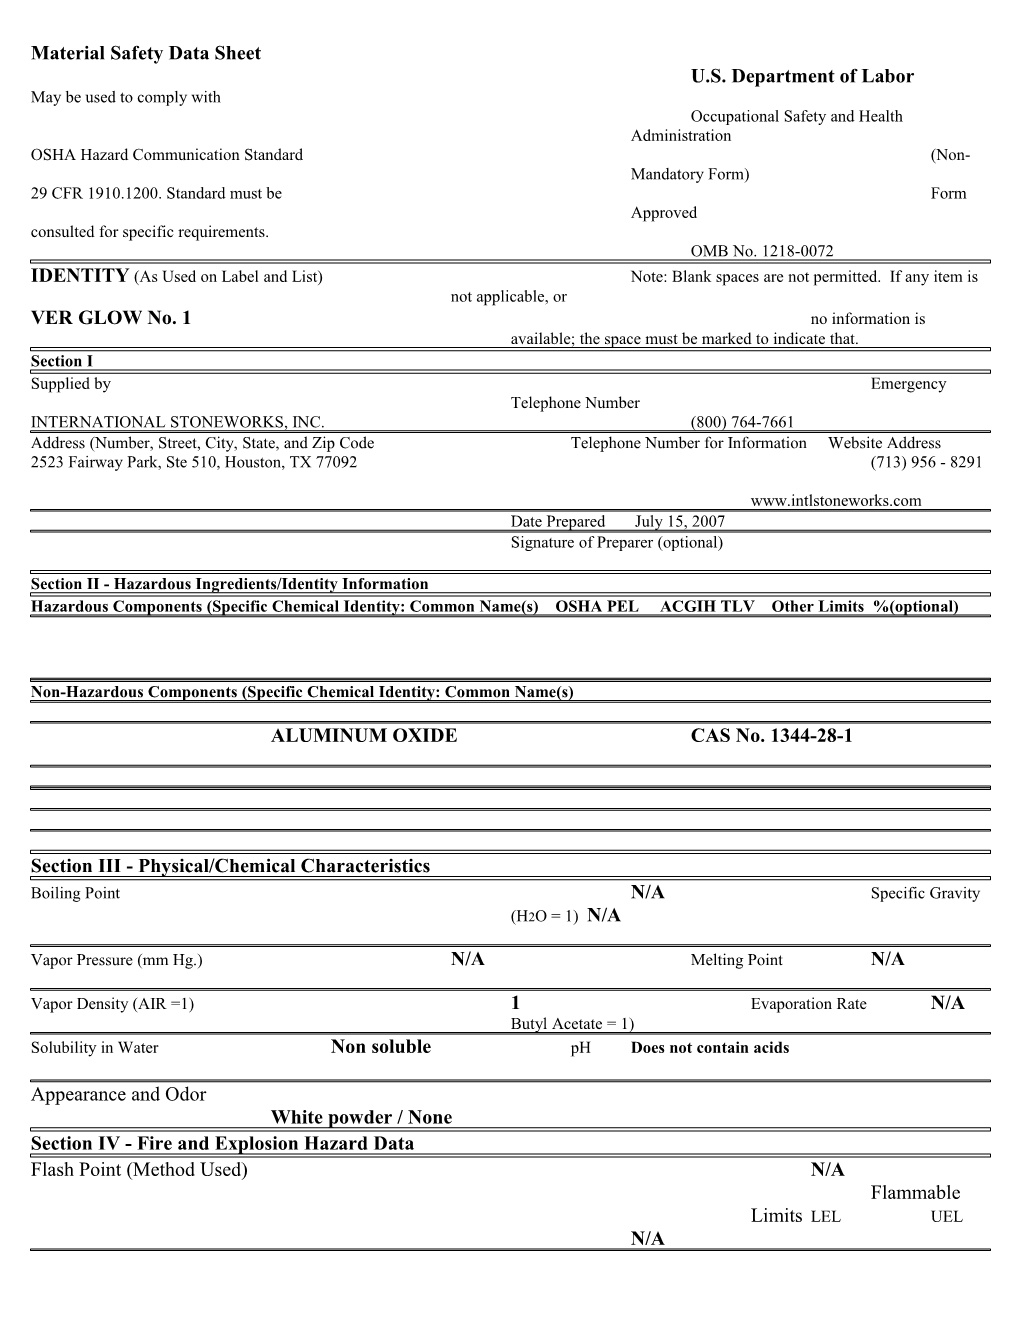 Material Safety Data Sheet U.S. Department of Labor s2